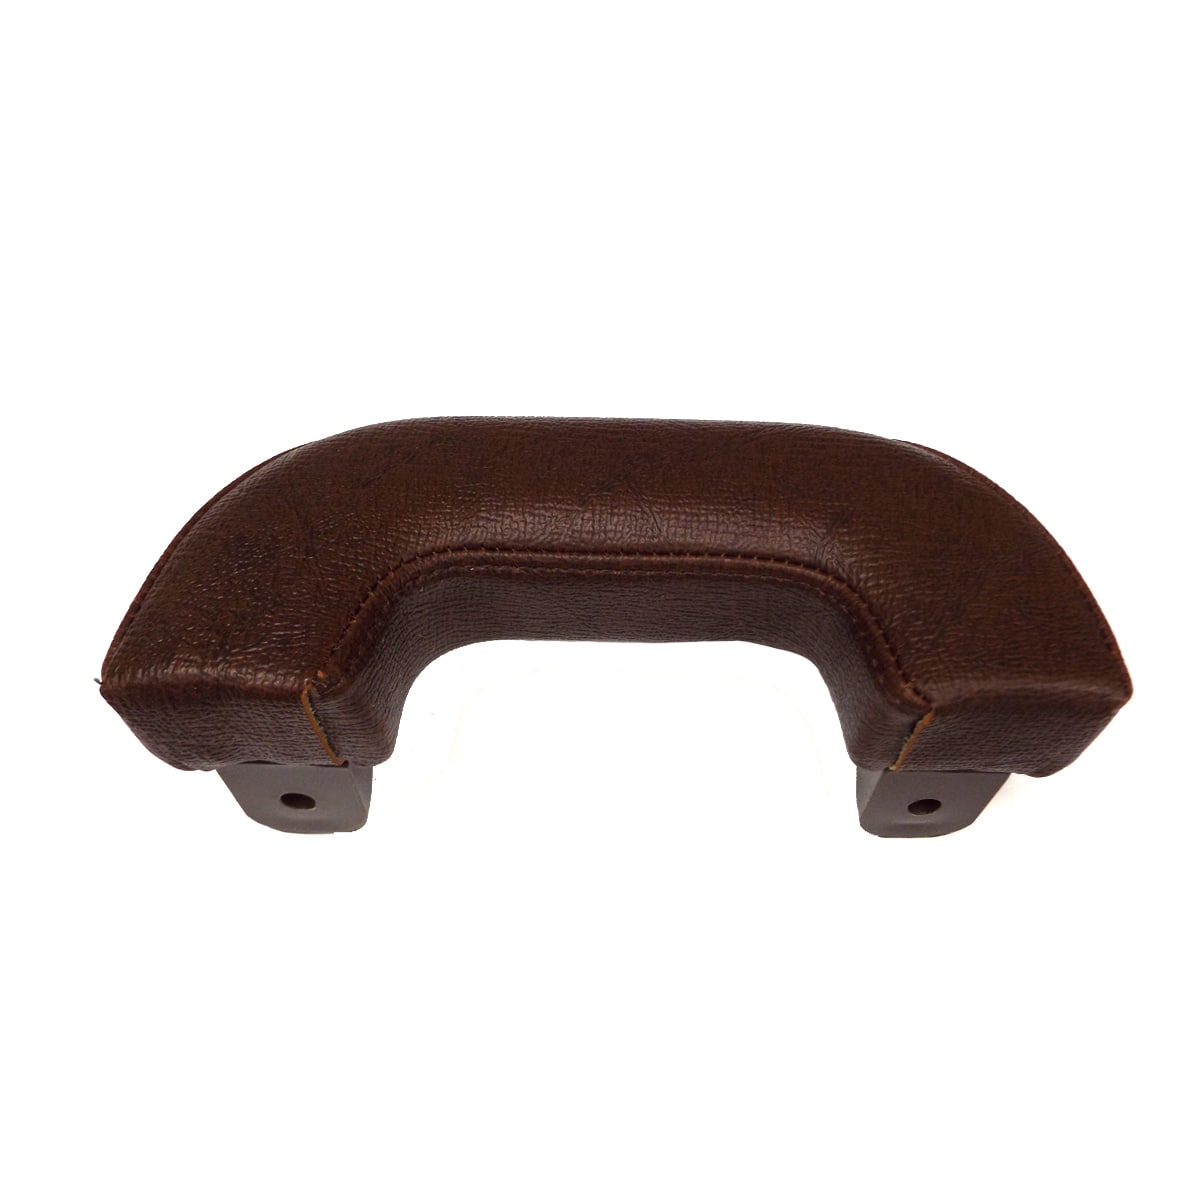 1947-1955 Arm Rest Standard Brown Chevrolet and GMC Pickup Truck